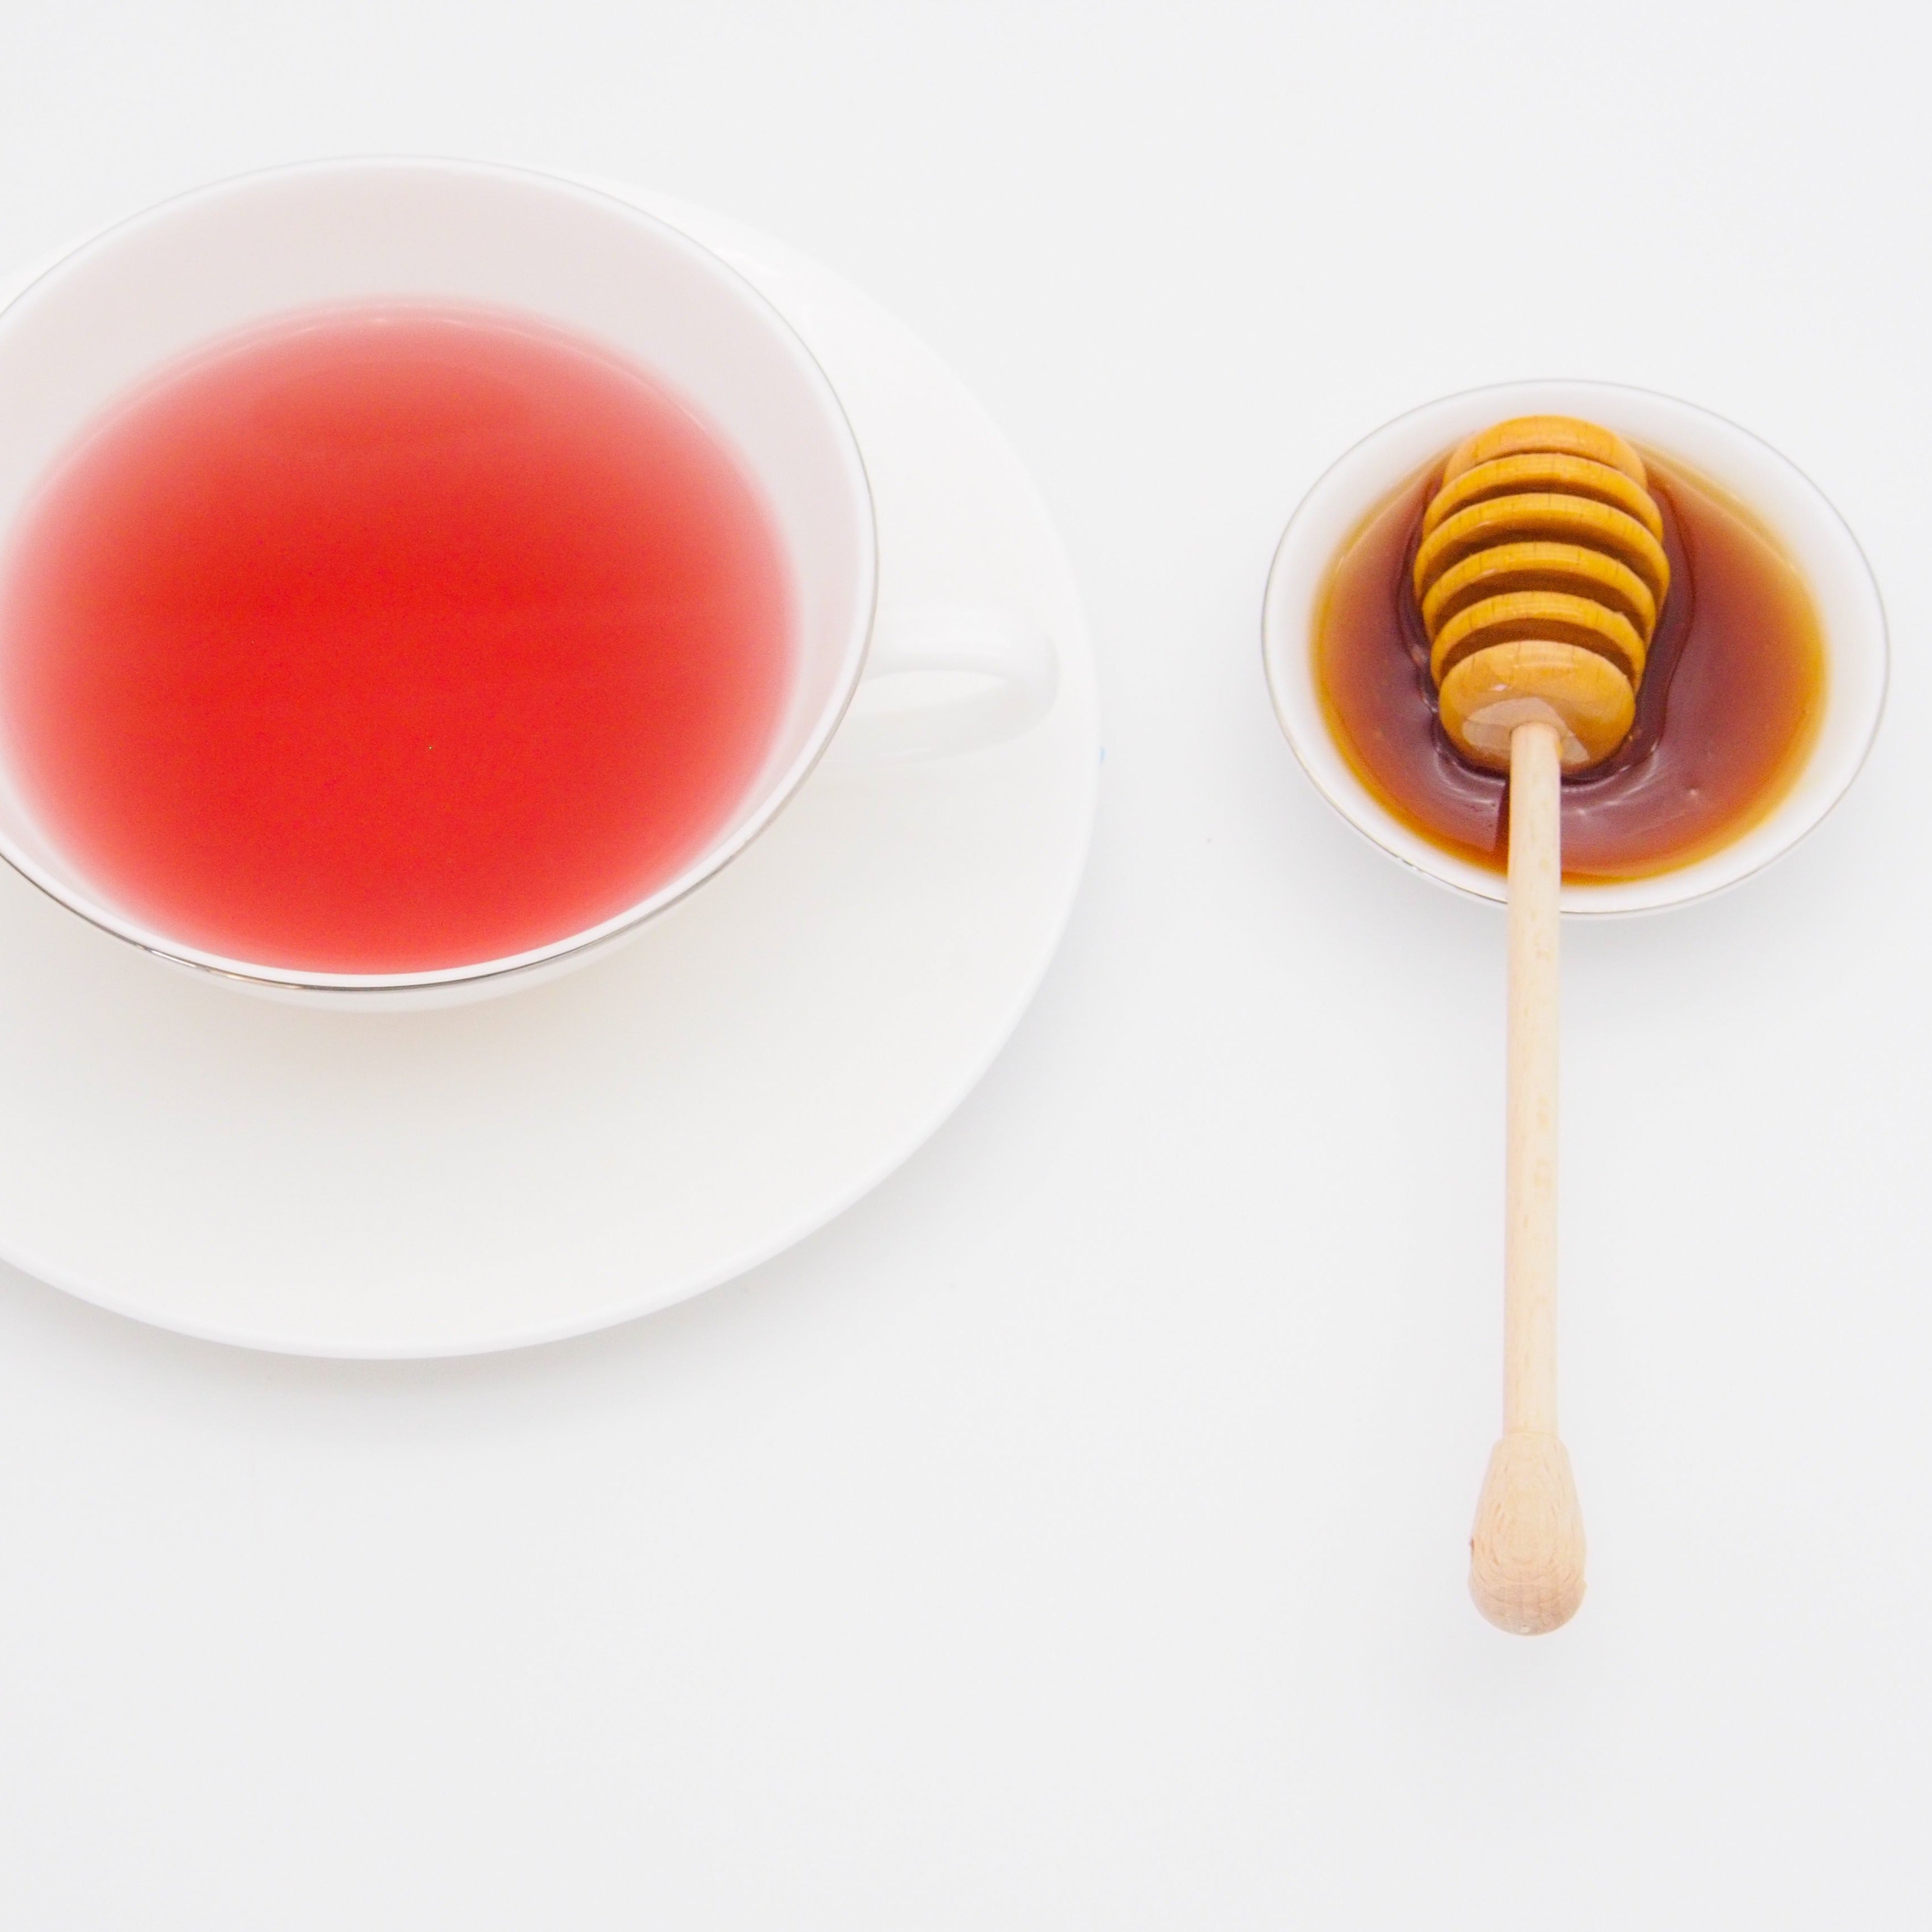 A cup of tea and honey.